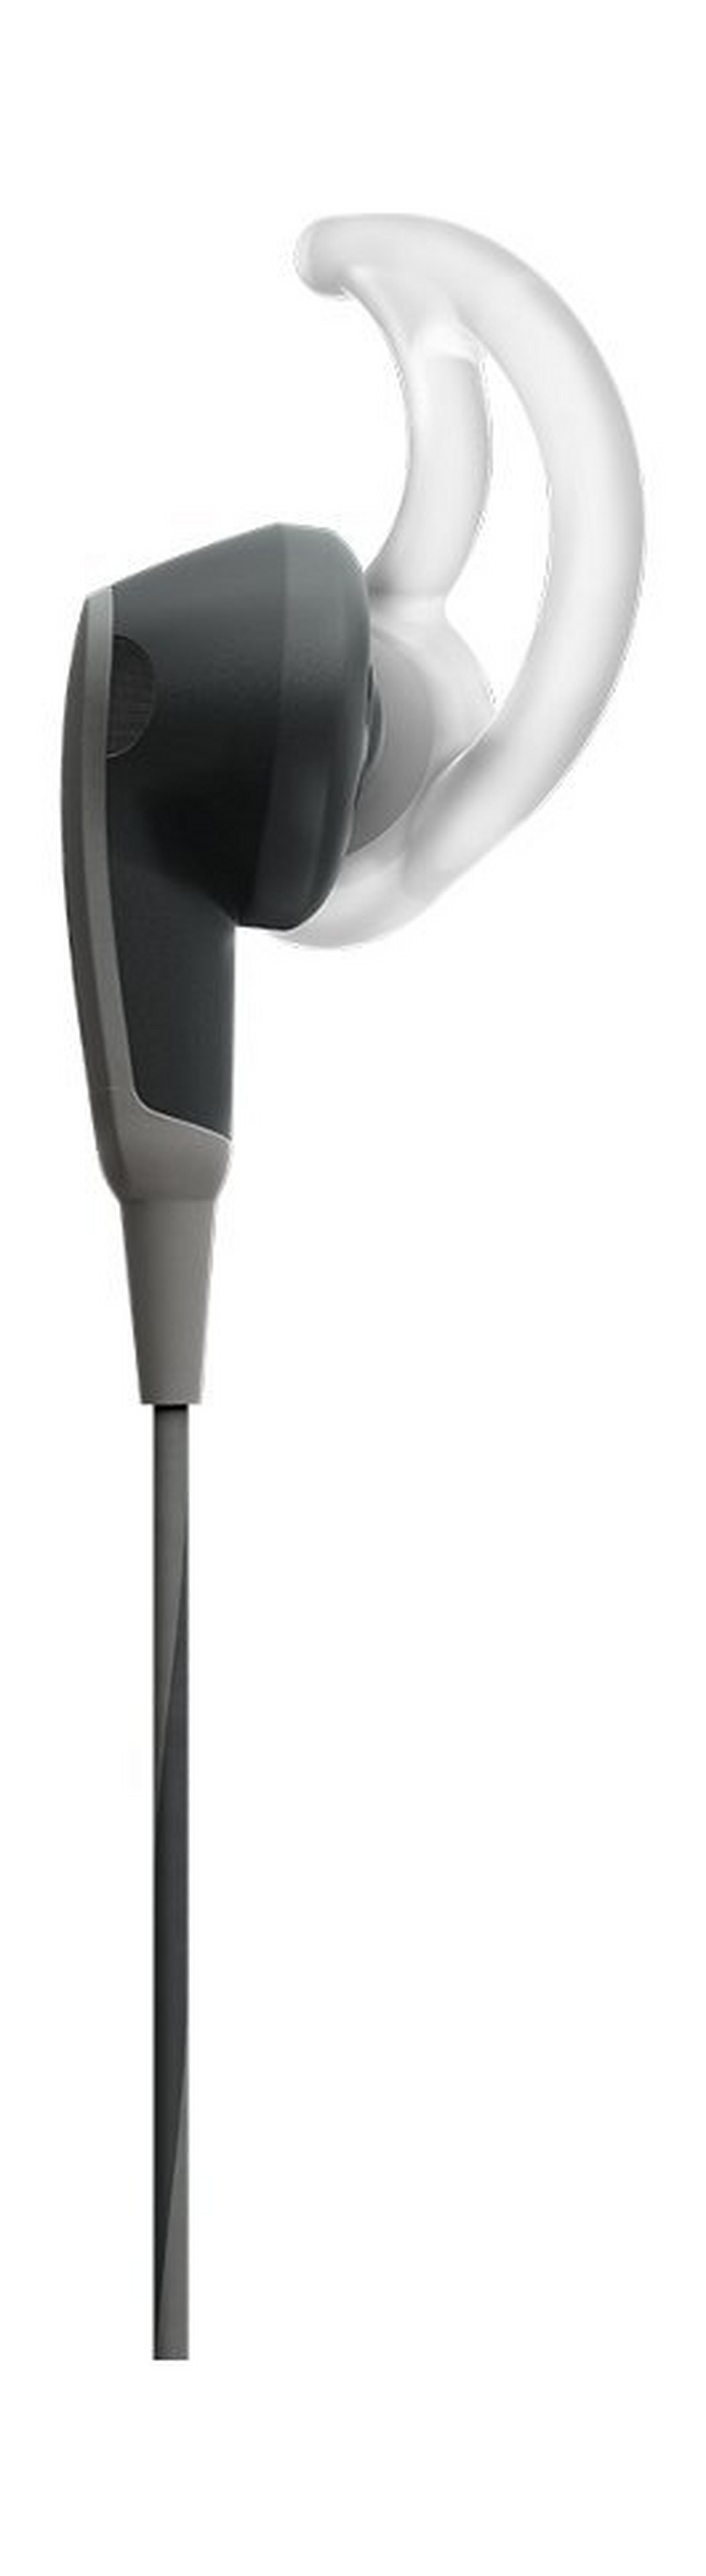 Bose SoundSport In-Ear Headphones for Android Devices - Charcoal Grey